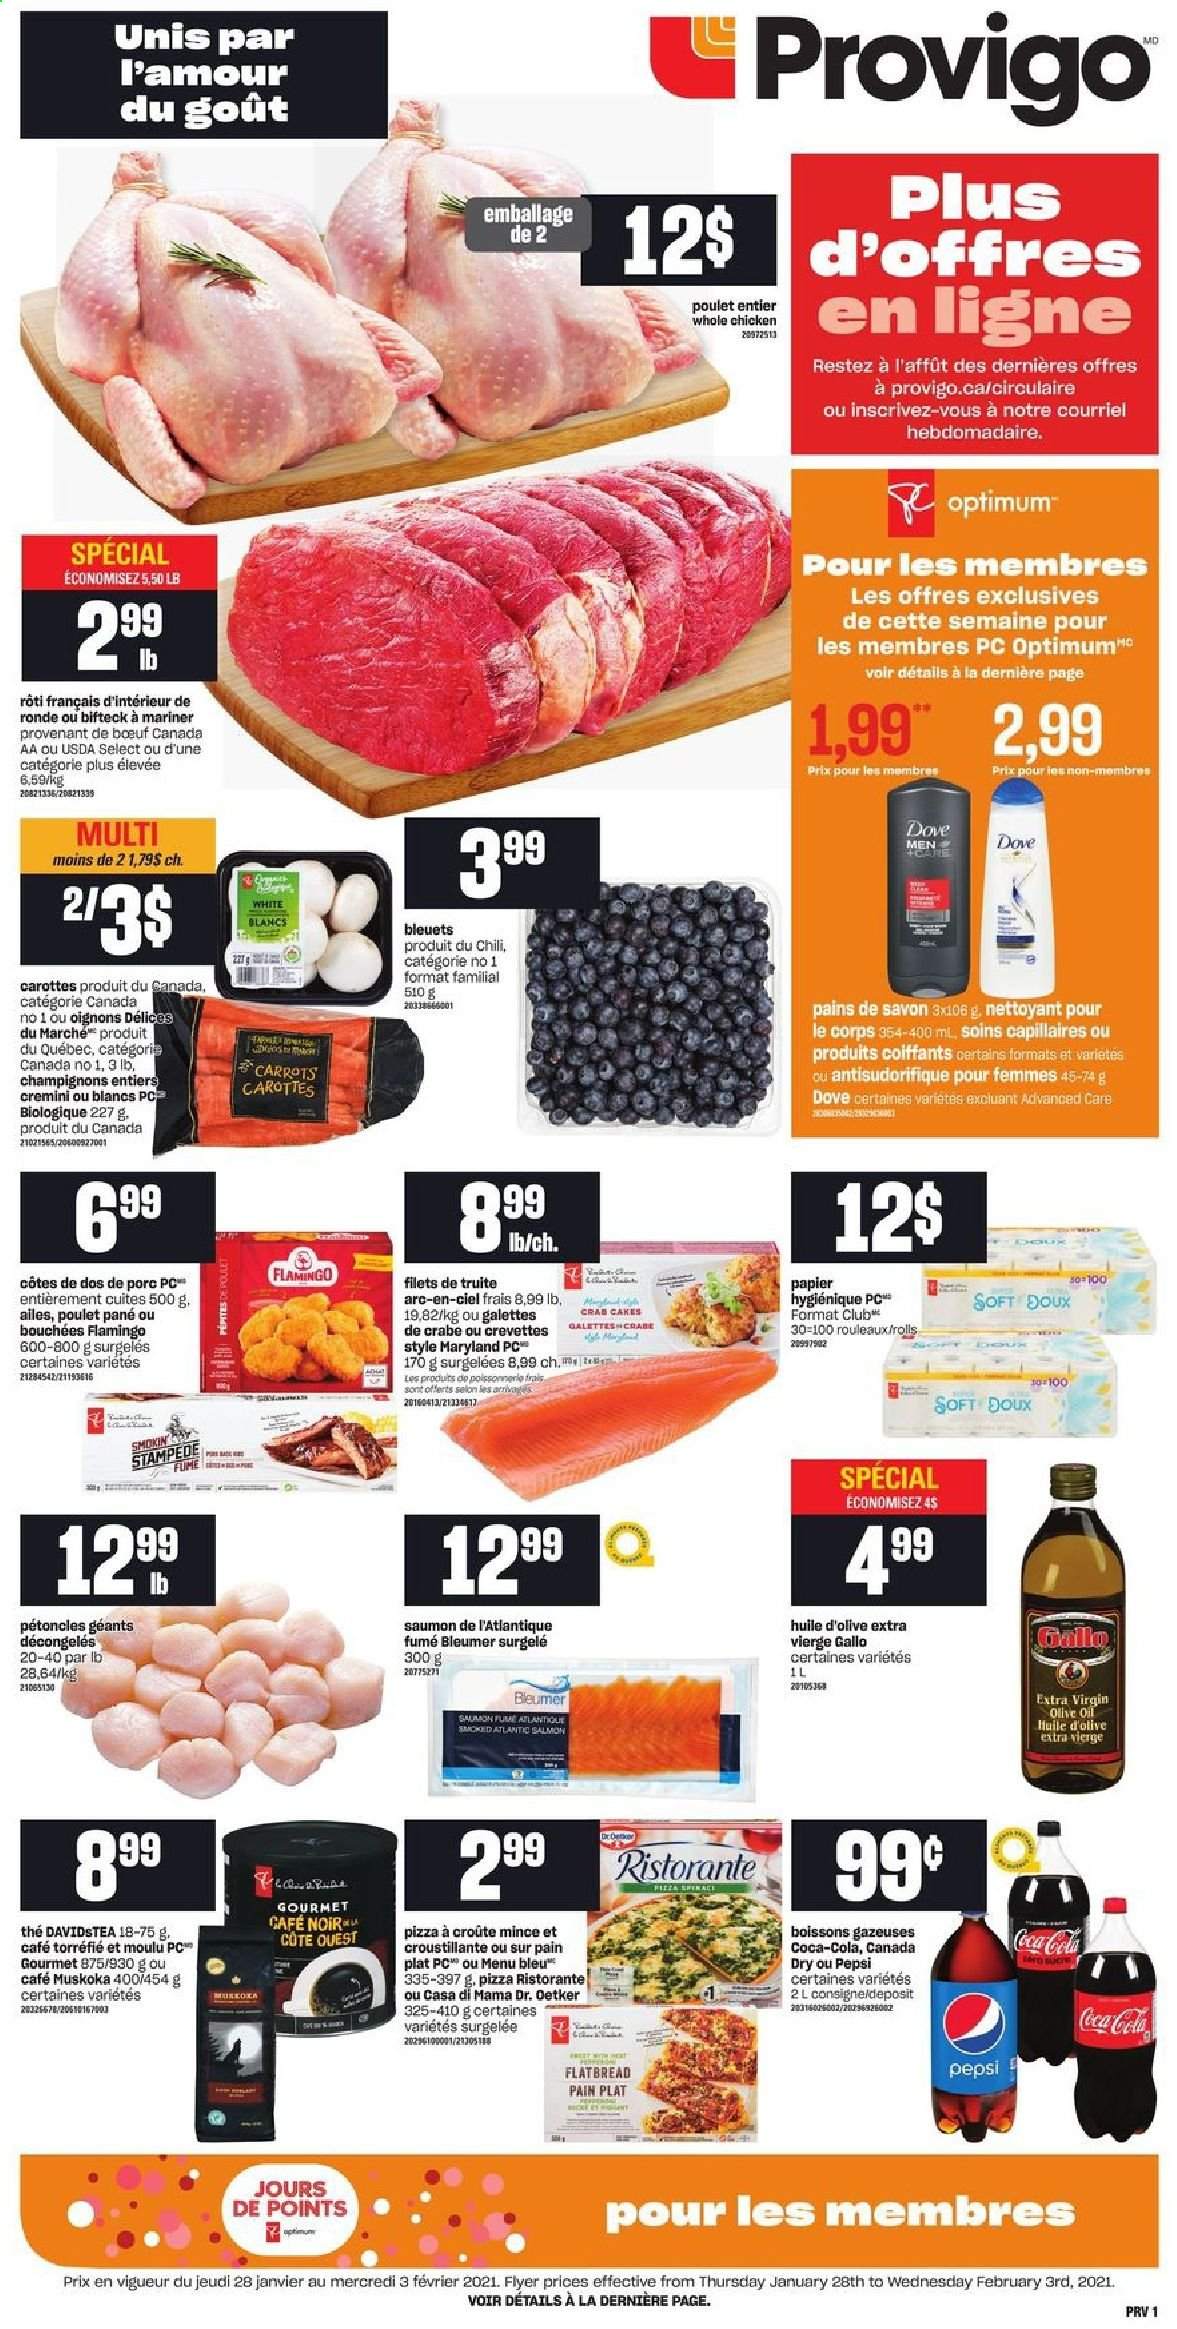 thumbnail - Provigo Flyer - January 28, 2021 - February 03, 2021 - Sales products - flatbread, carrots, salmon, crab cake, pizza, Dr. Oetker, extra virgin olive oil, olive oil, oil, Canada Dry, Coca-Cola, Pepsi, whole chicken, chicken. Page 1.